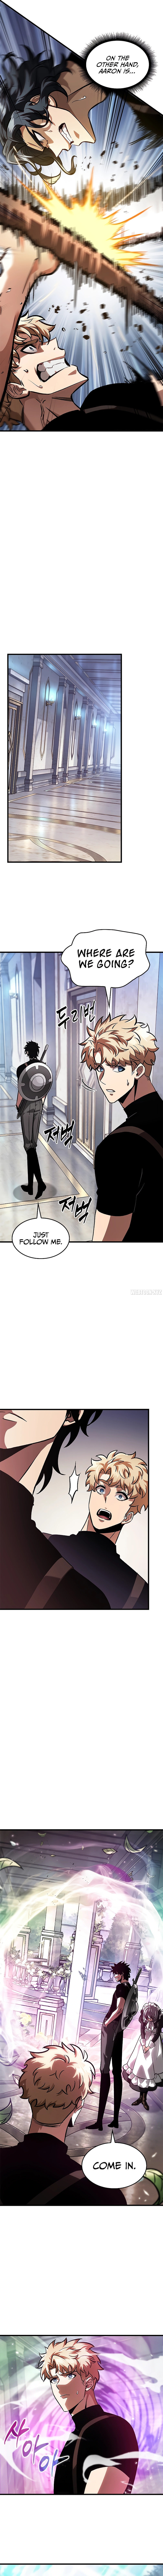 Pick Me Up - Chapter 88 Page 5